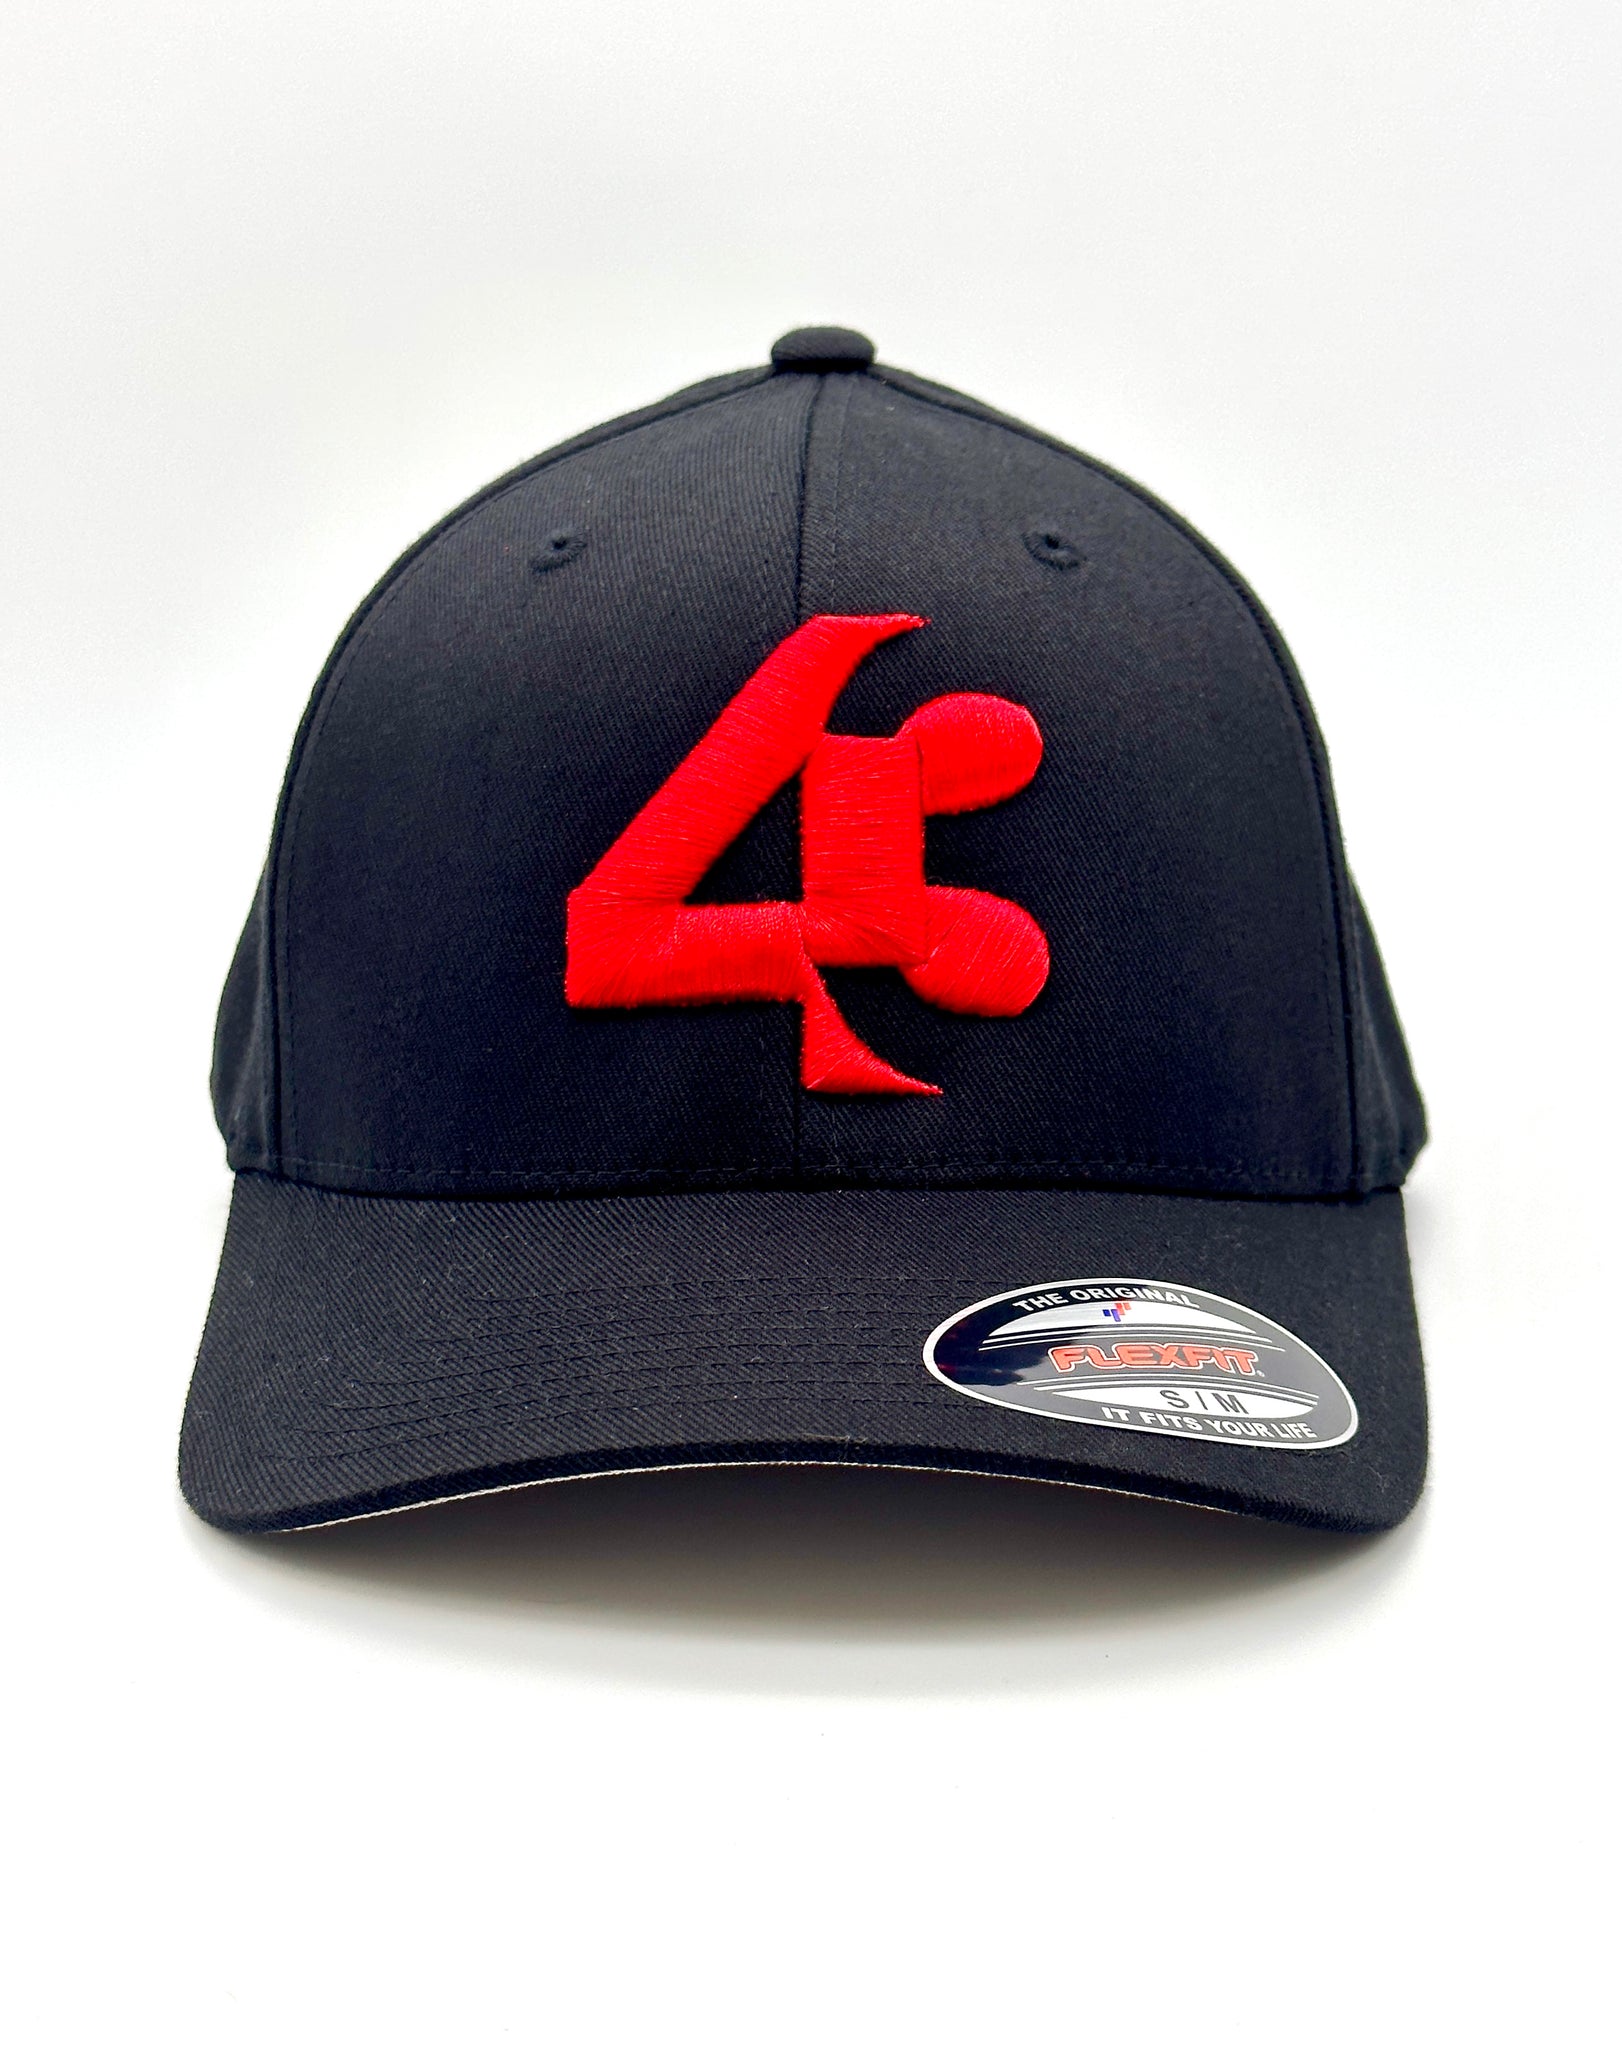 43 Black with red emblem – Fitted USA FortyThree™ Flexfit®